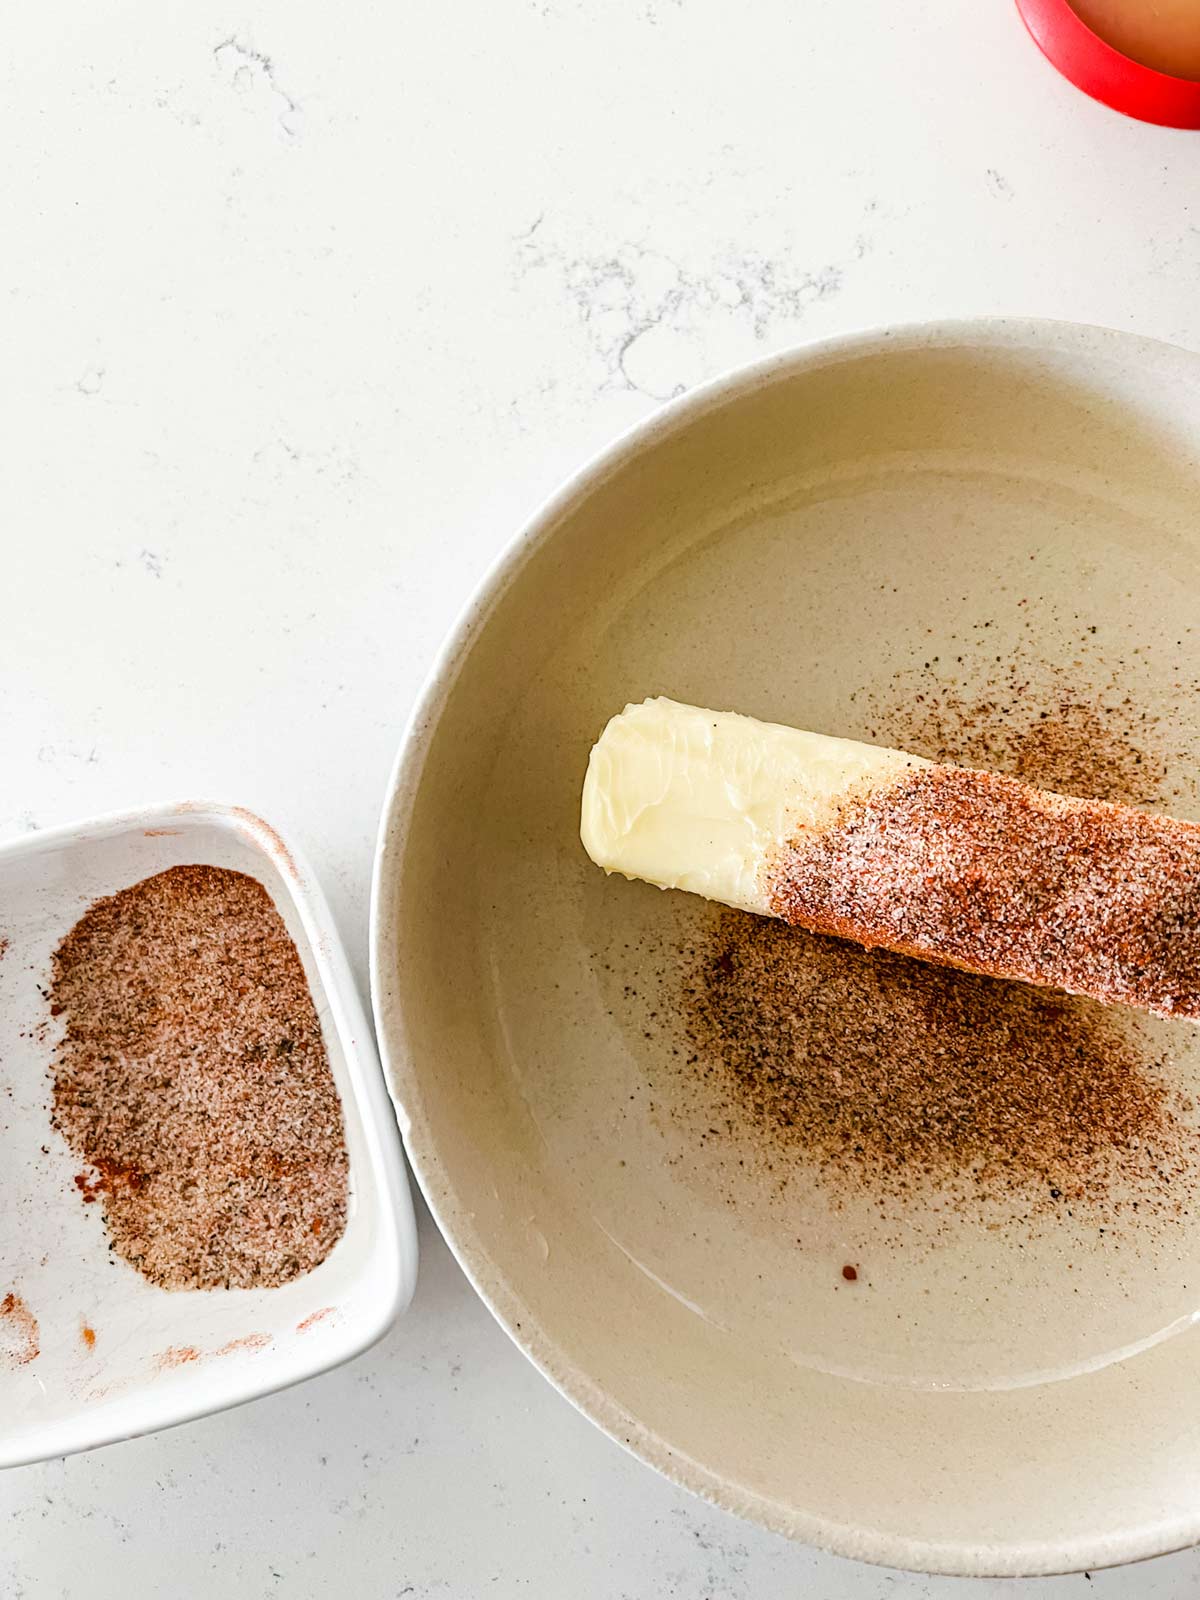 A small bowl of seasonings that has had half of its contents sprinkled on top of butter.